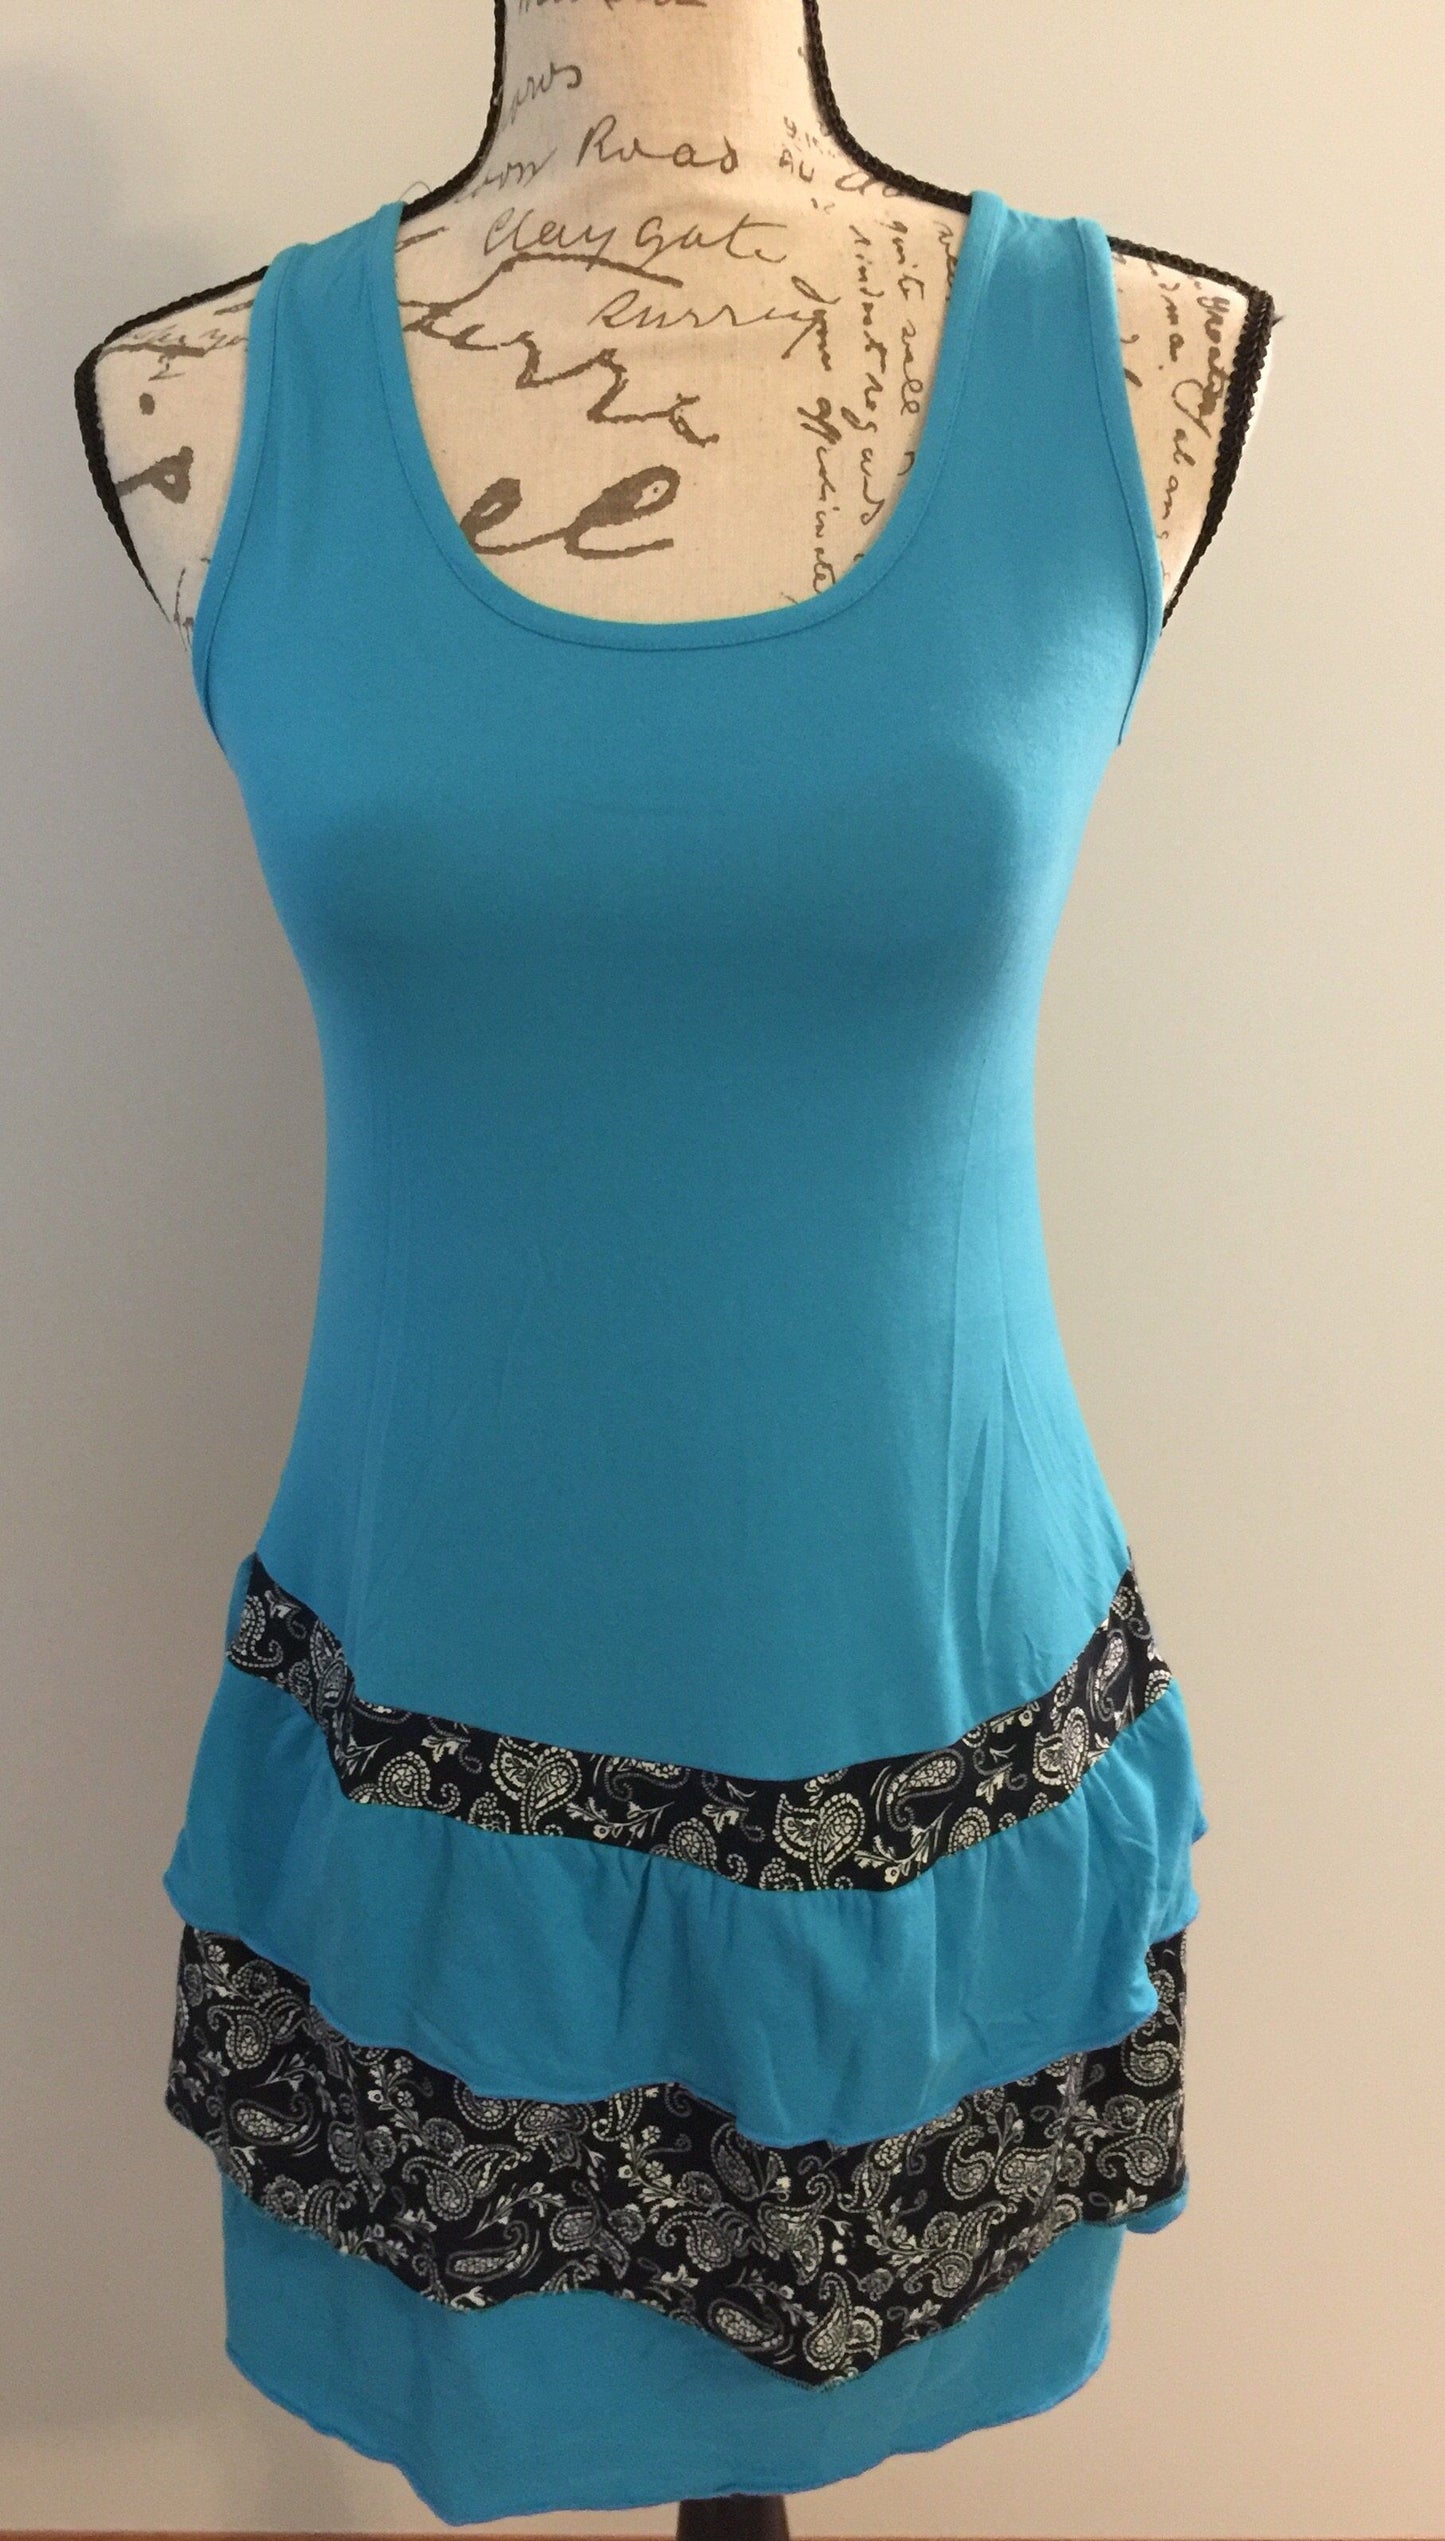 New Womens Teal Blue Ruffle Dress Swim Cover MomMeAndMore